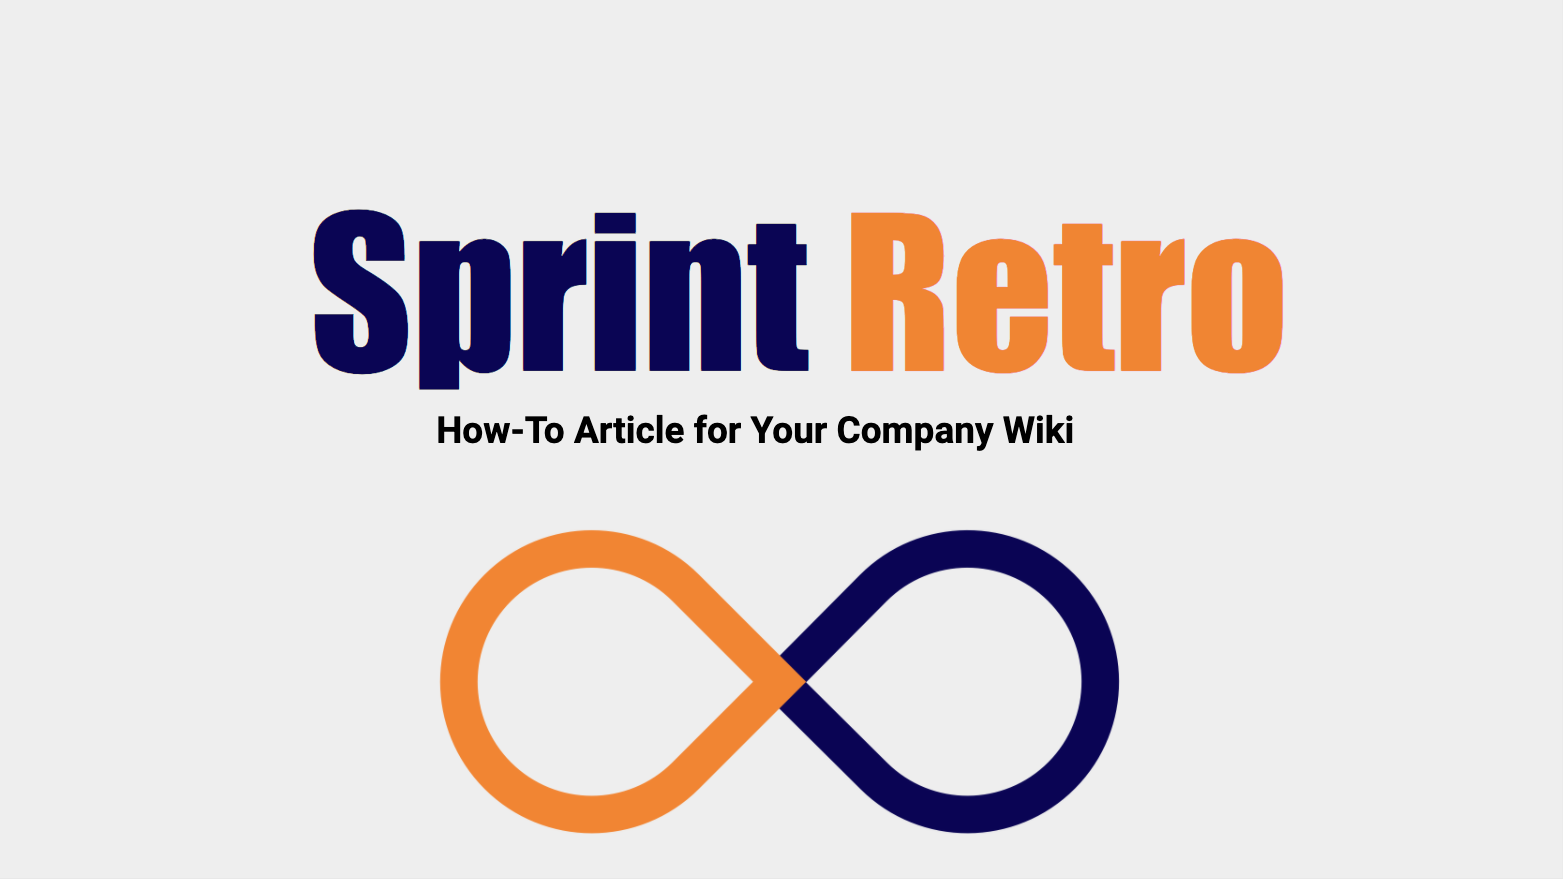 Sprint Retrospective: How-To Article for Your Company Wiki | by Iris Bröse  | Agile Loops | Medium